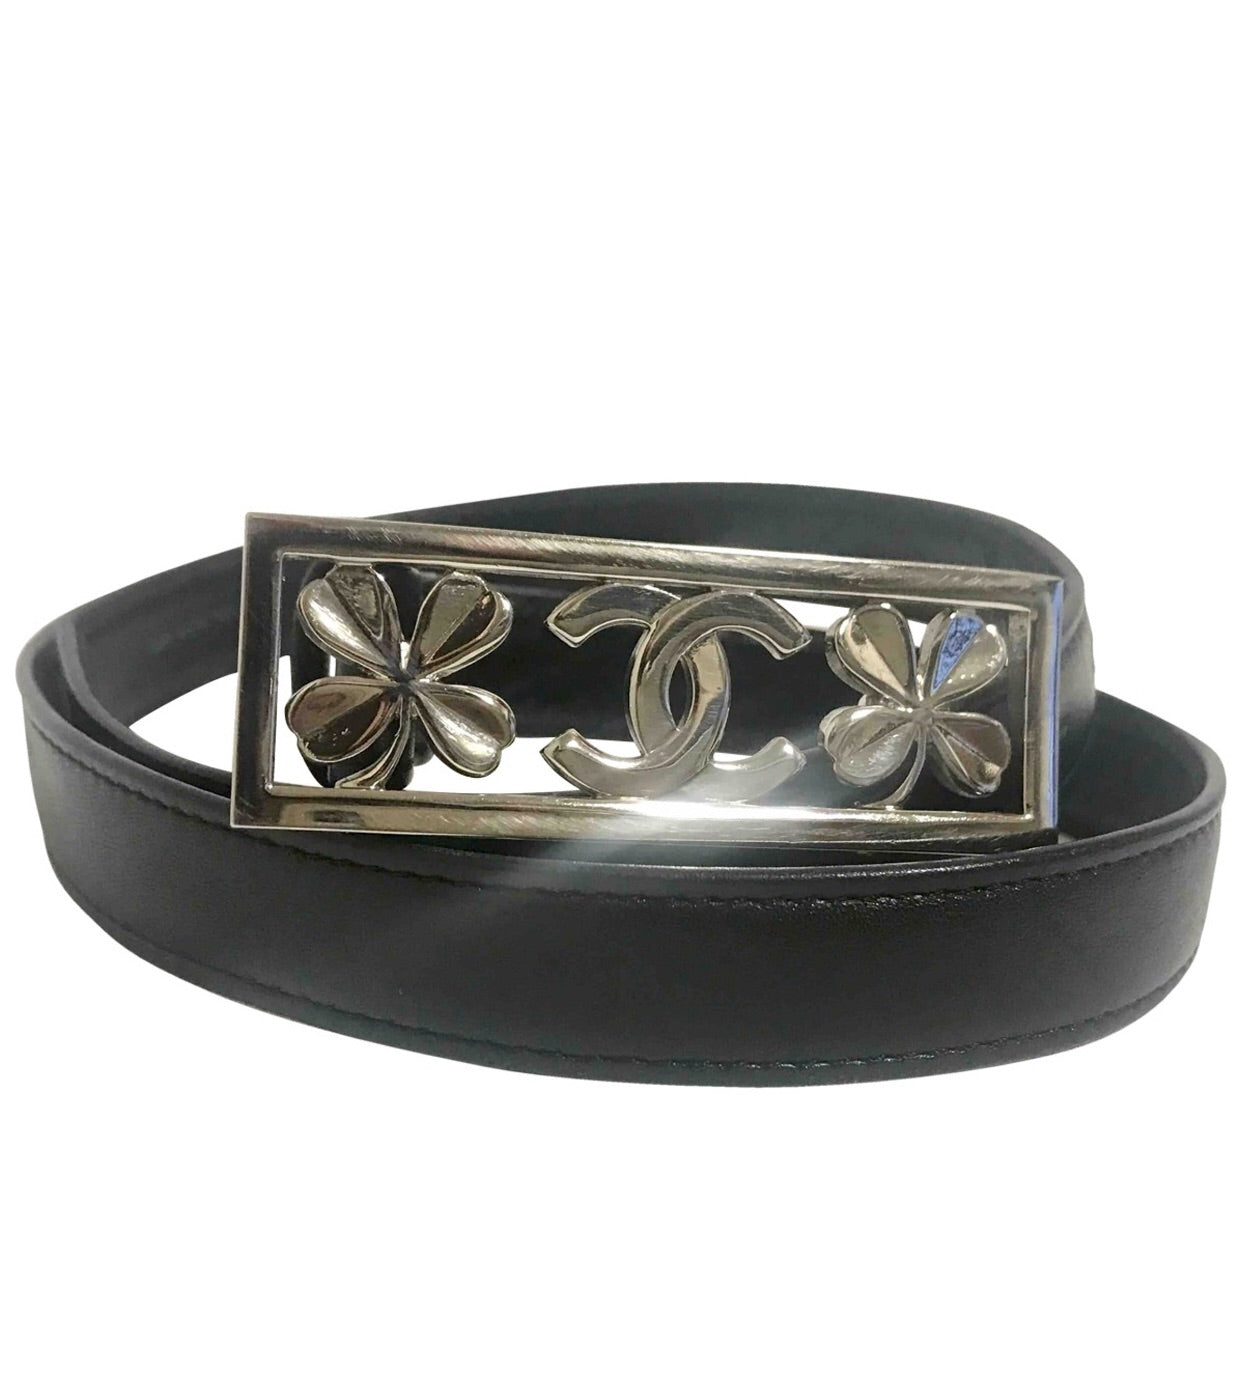 Chanel Black Leather Belt with Silver Logo Buckle - 32